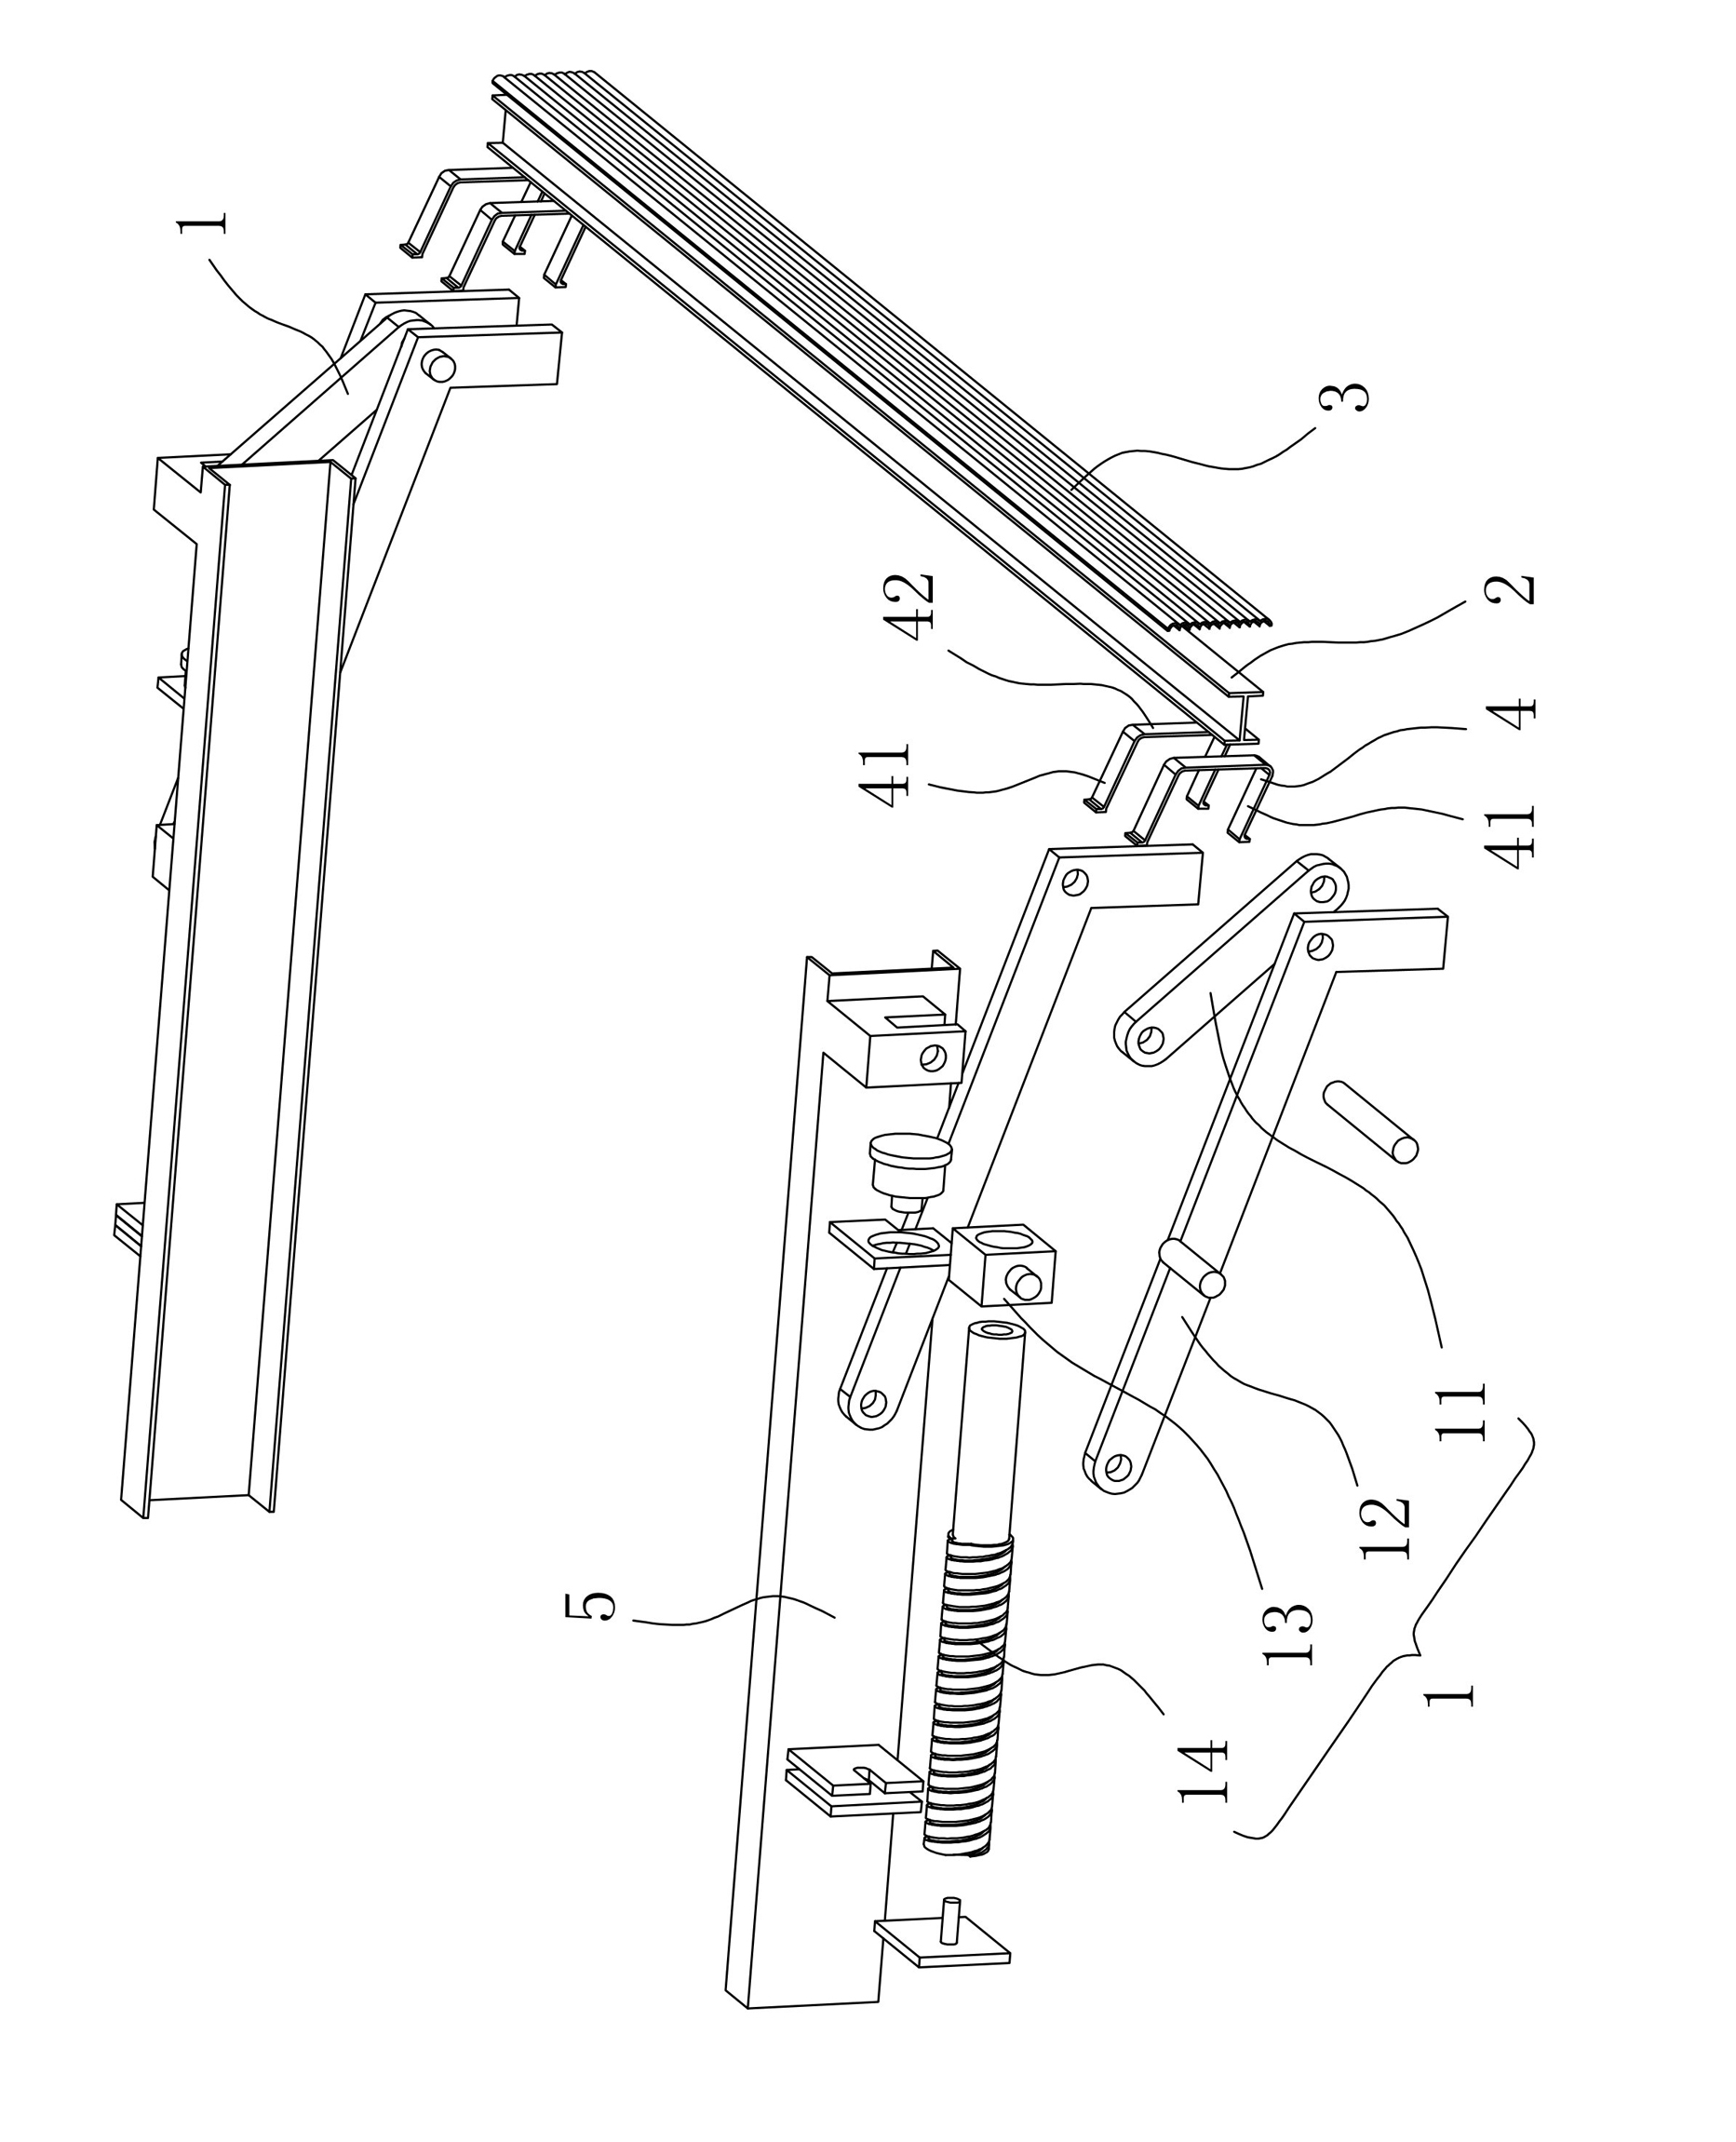 Anticollision device for rear of truck